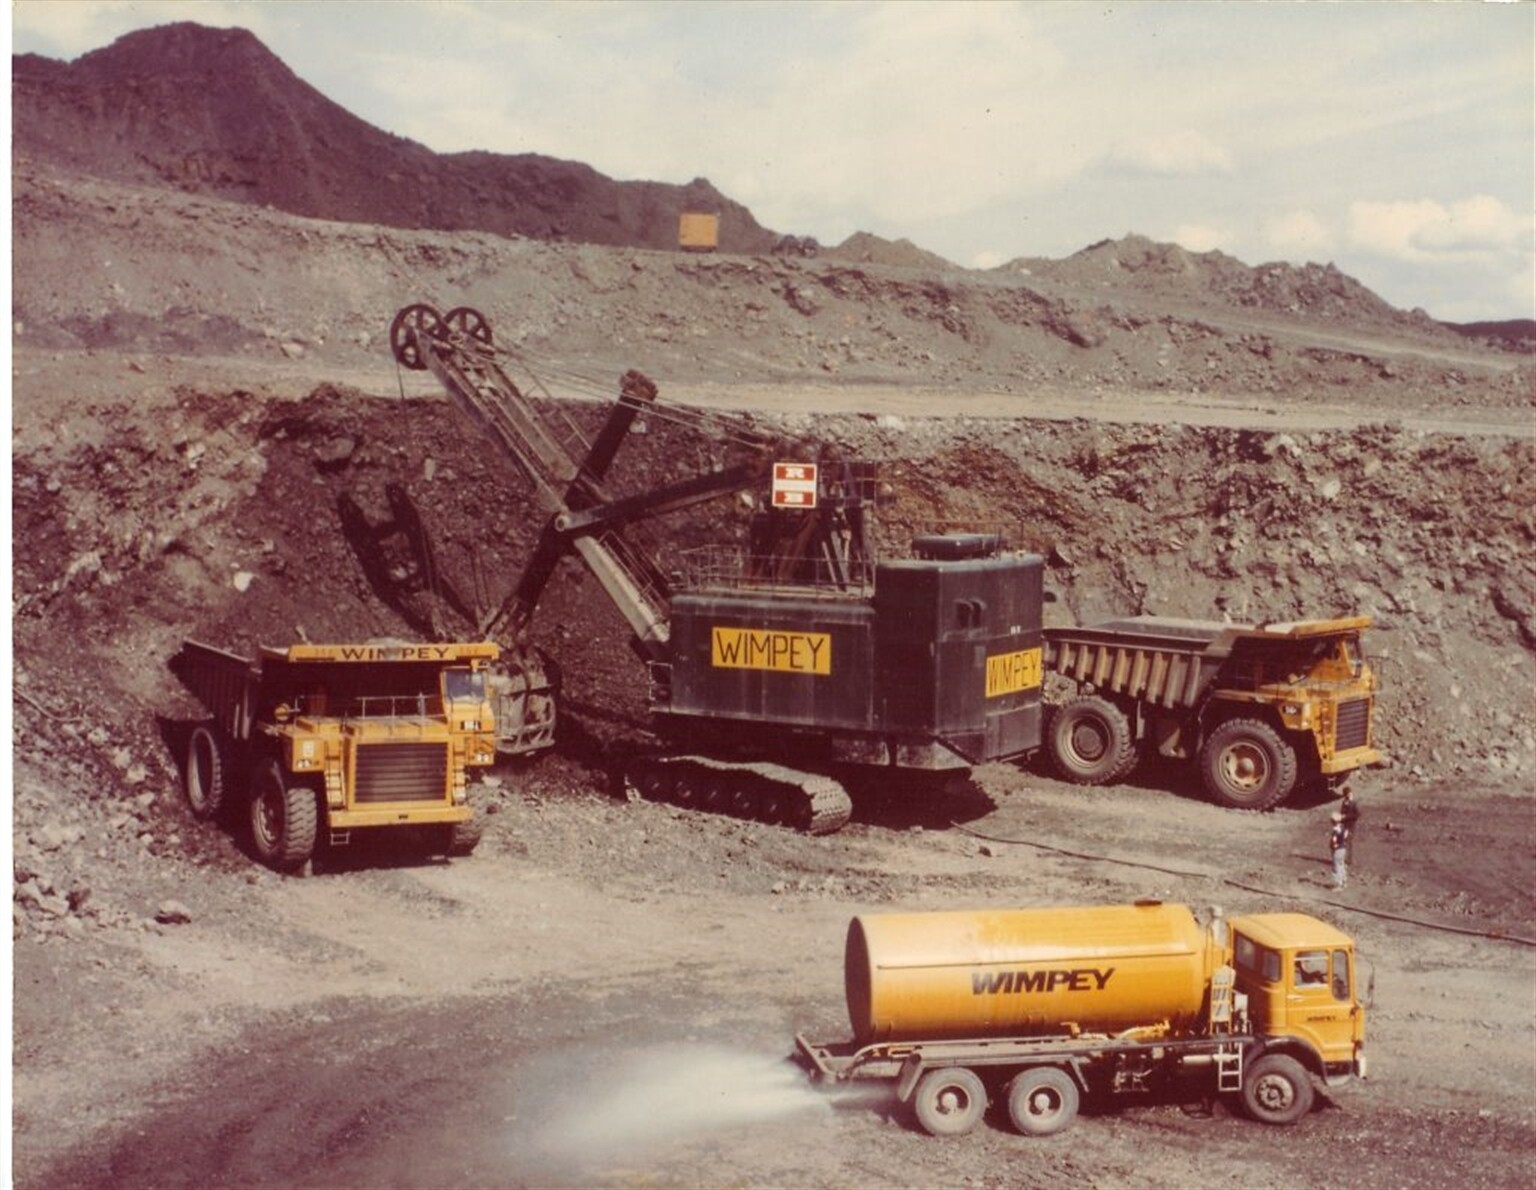 Wimpey Mining Memories (Blog Post Re-Visited)